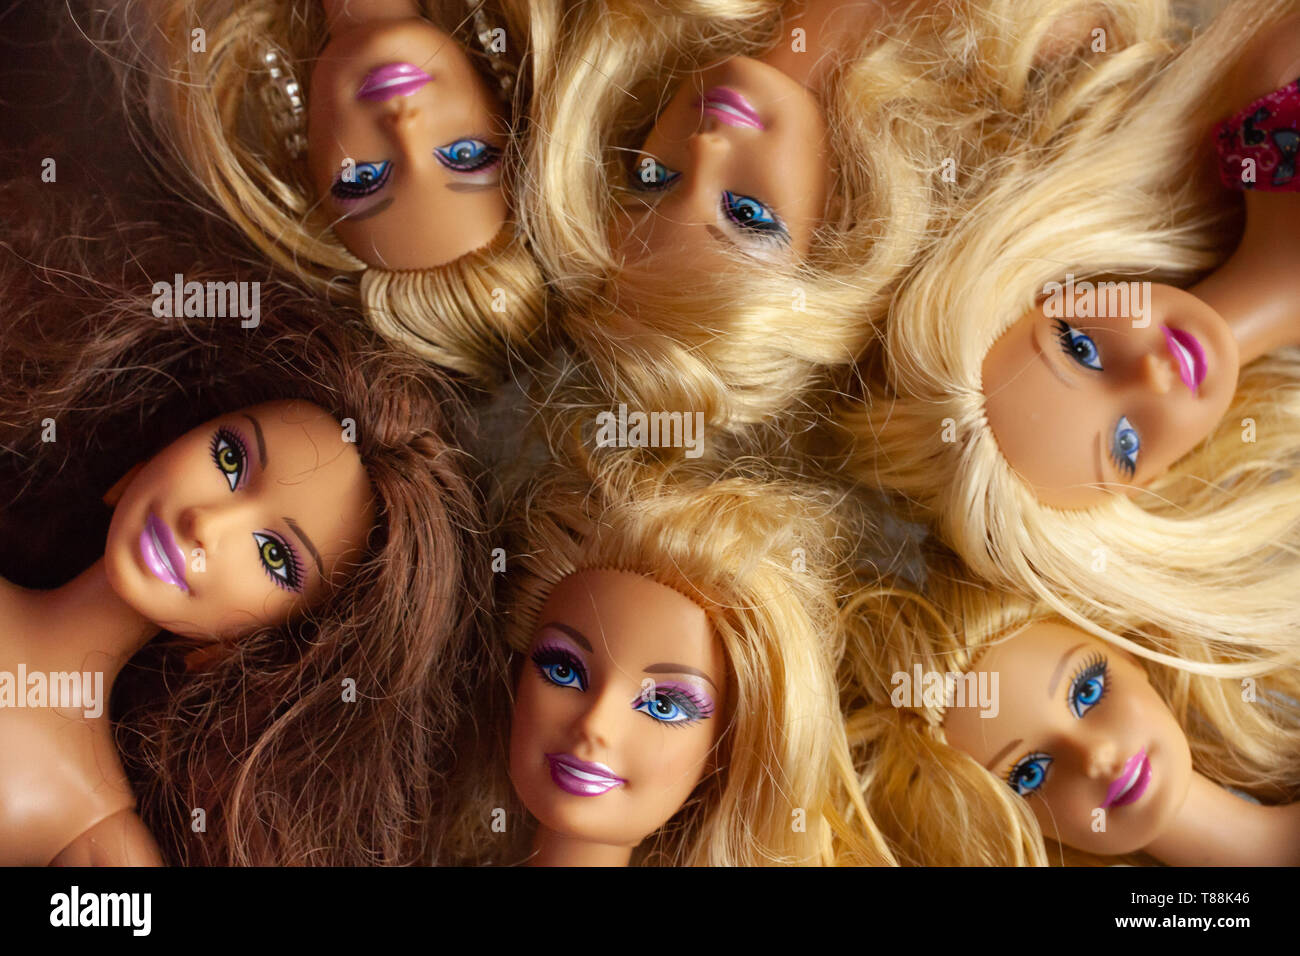 WOODBRIDGE, NEW JERSEY - May 10, 2019: A collection of various 2000s era  Barbie Dolls with a focus on their heads Stock Photo - Alamy